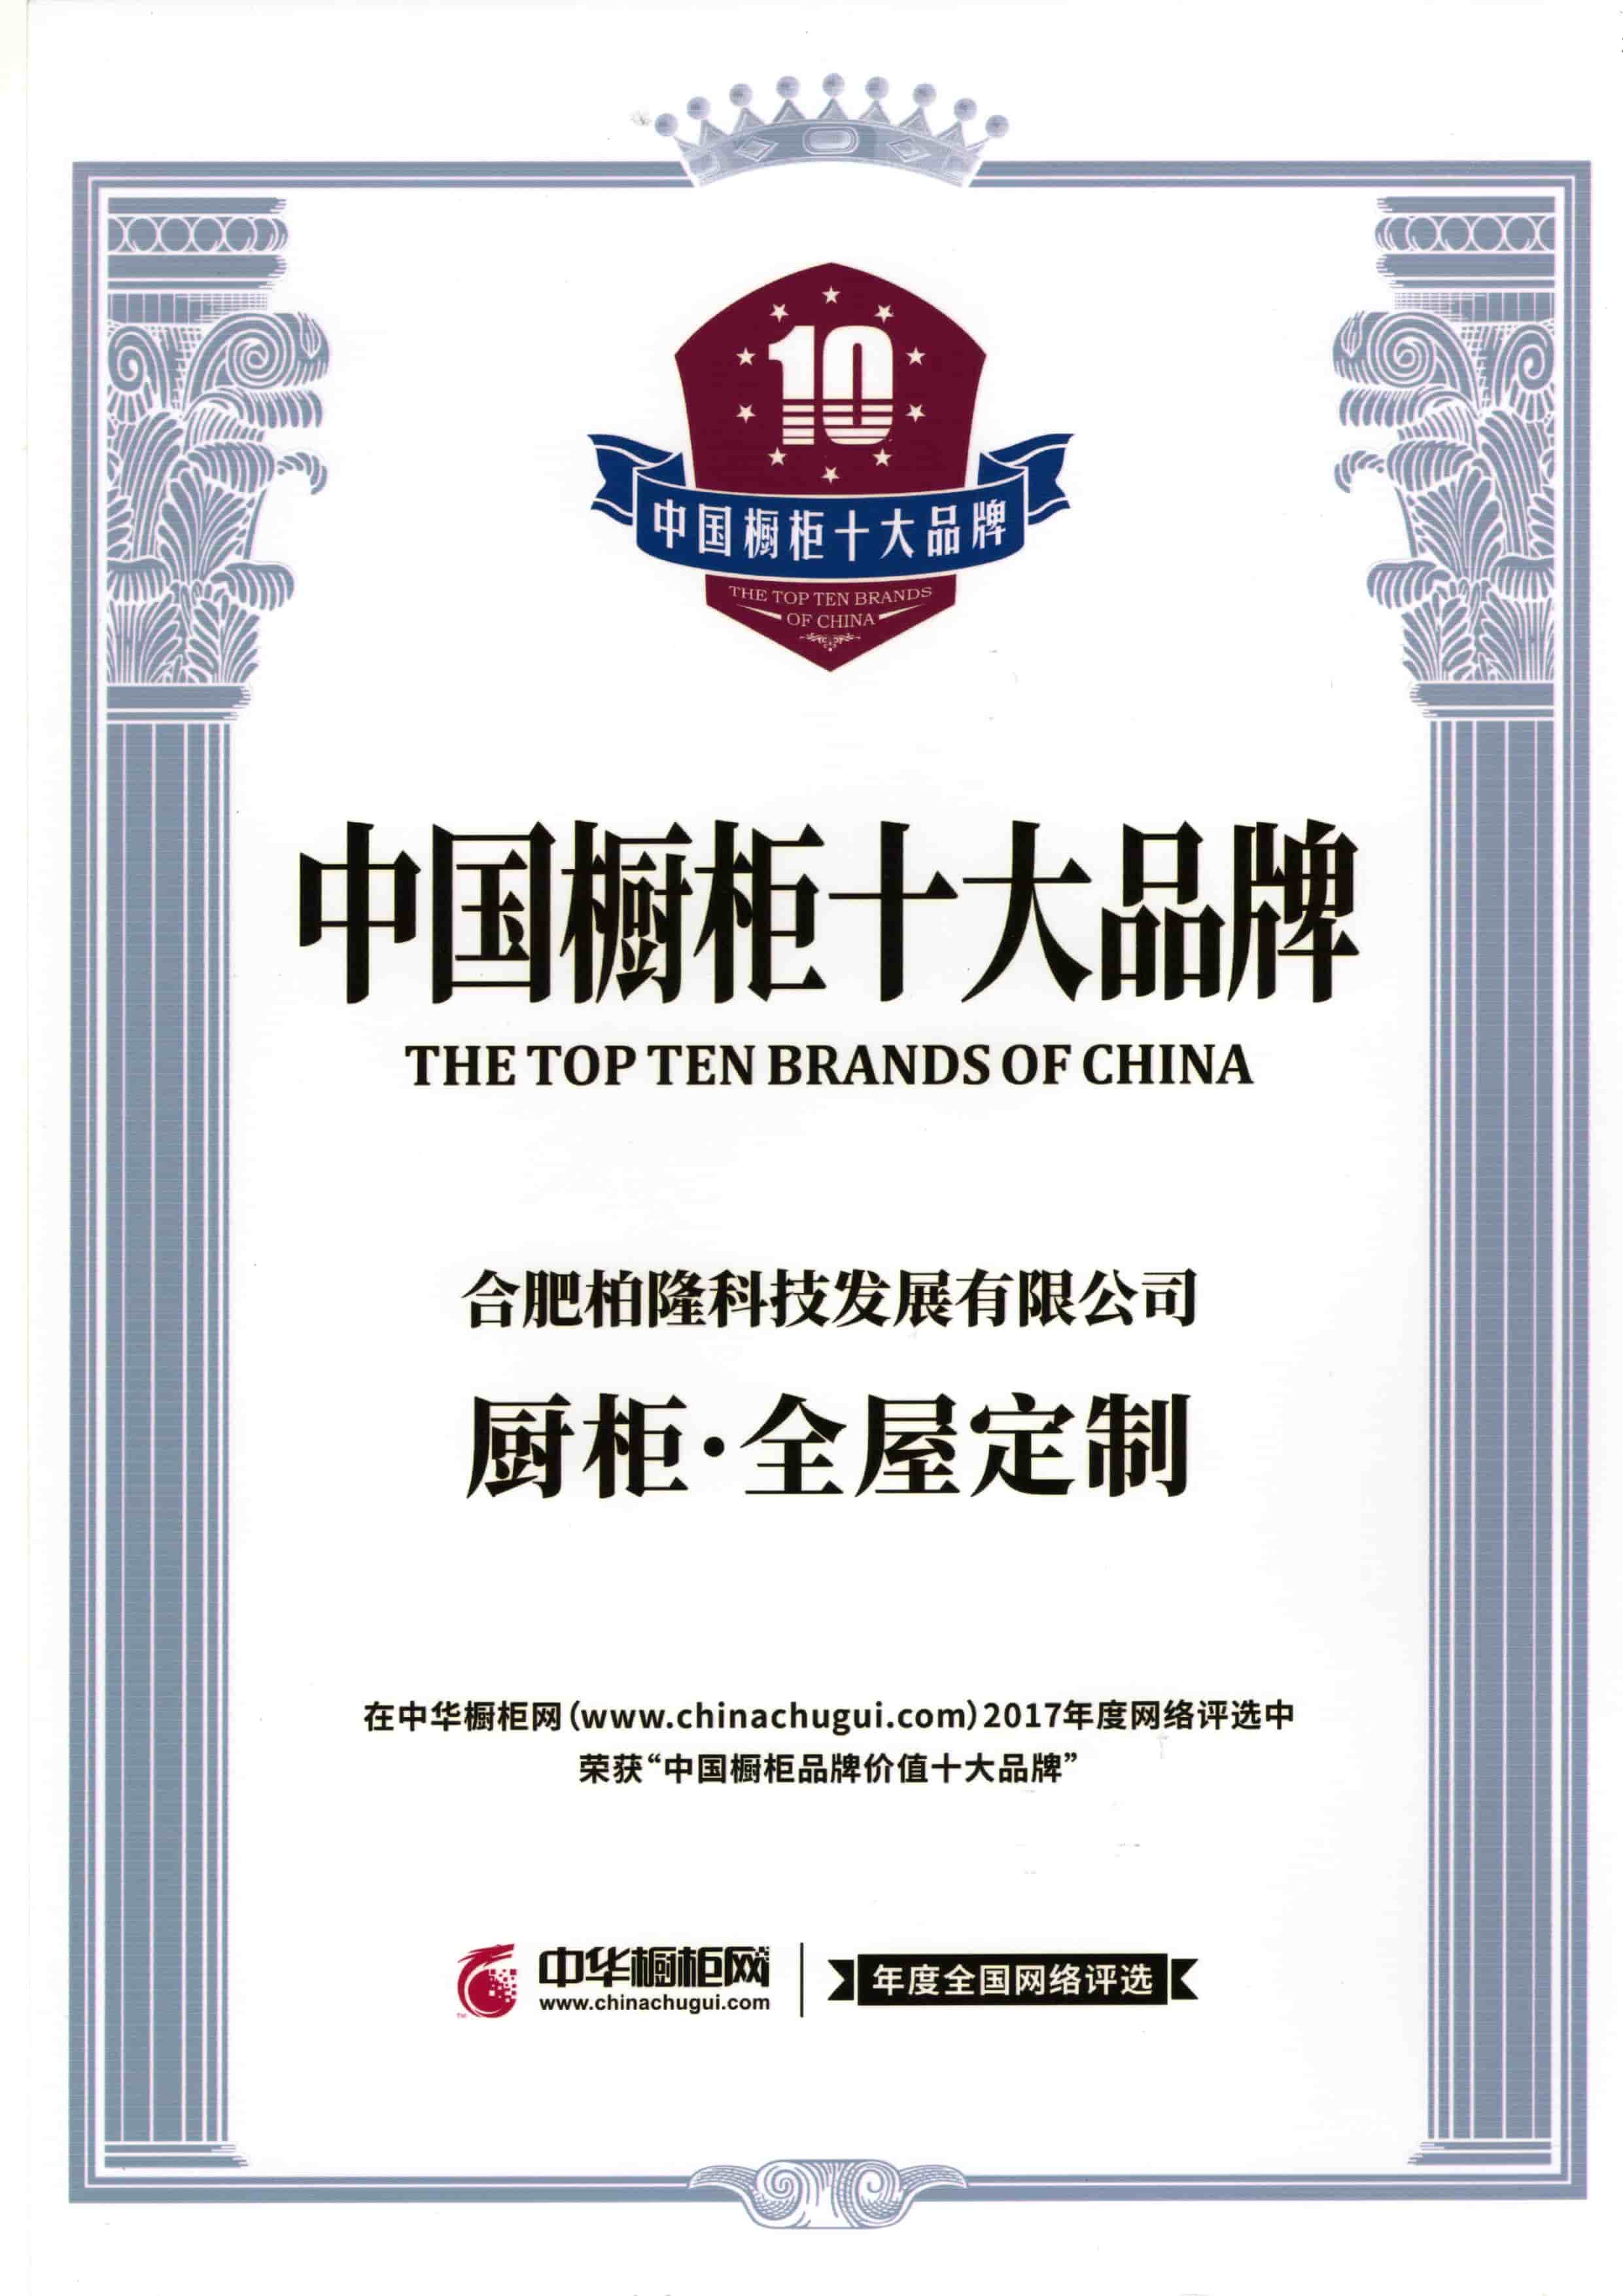 One of the top ten brands in China